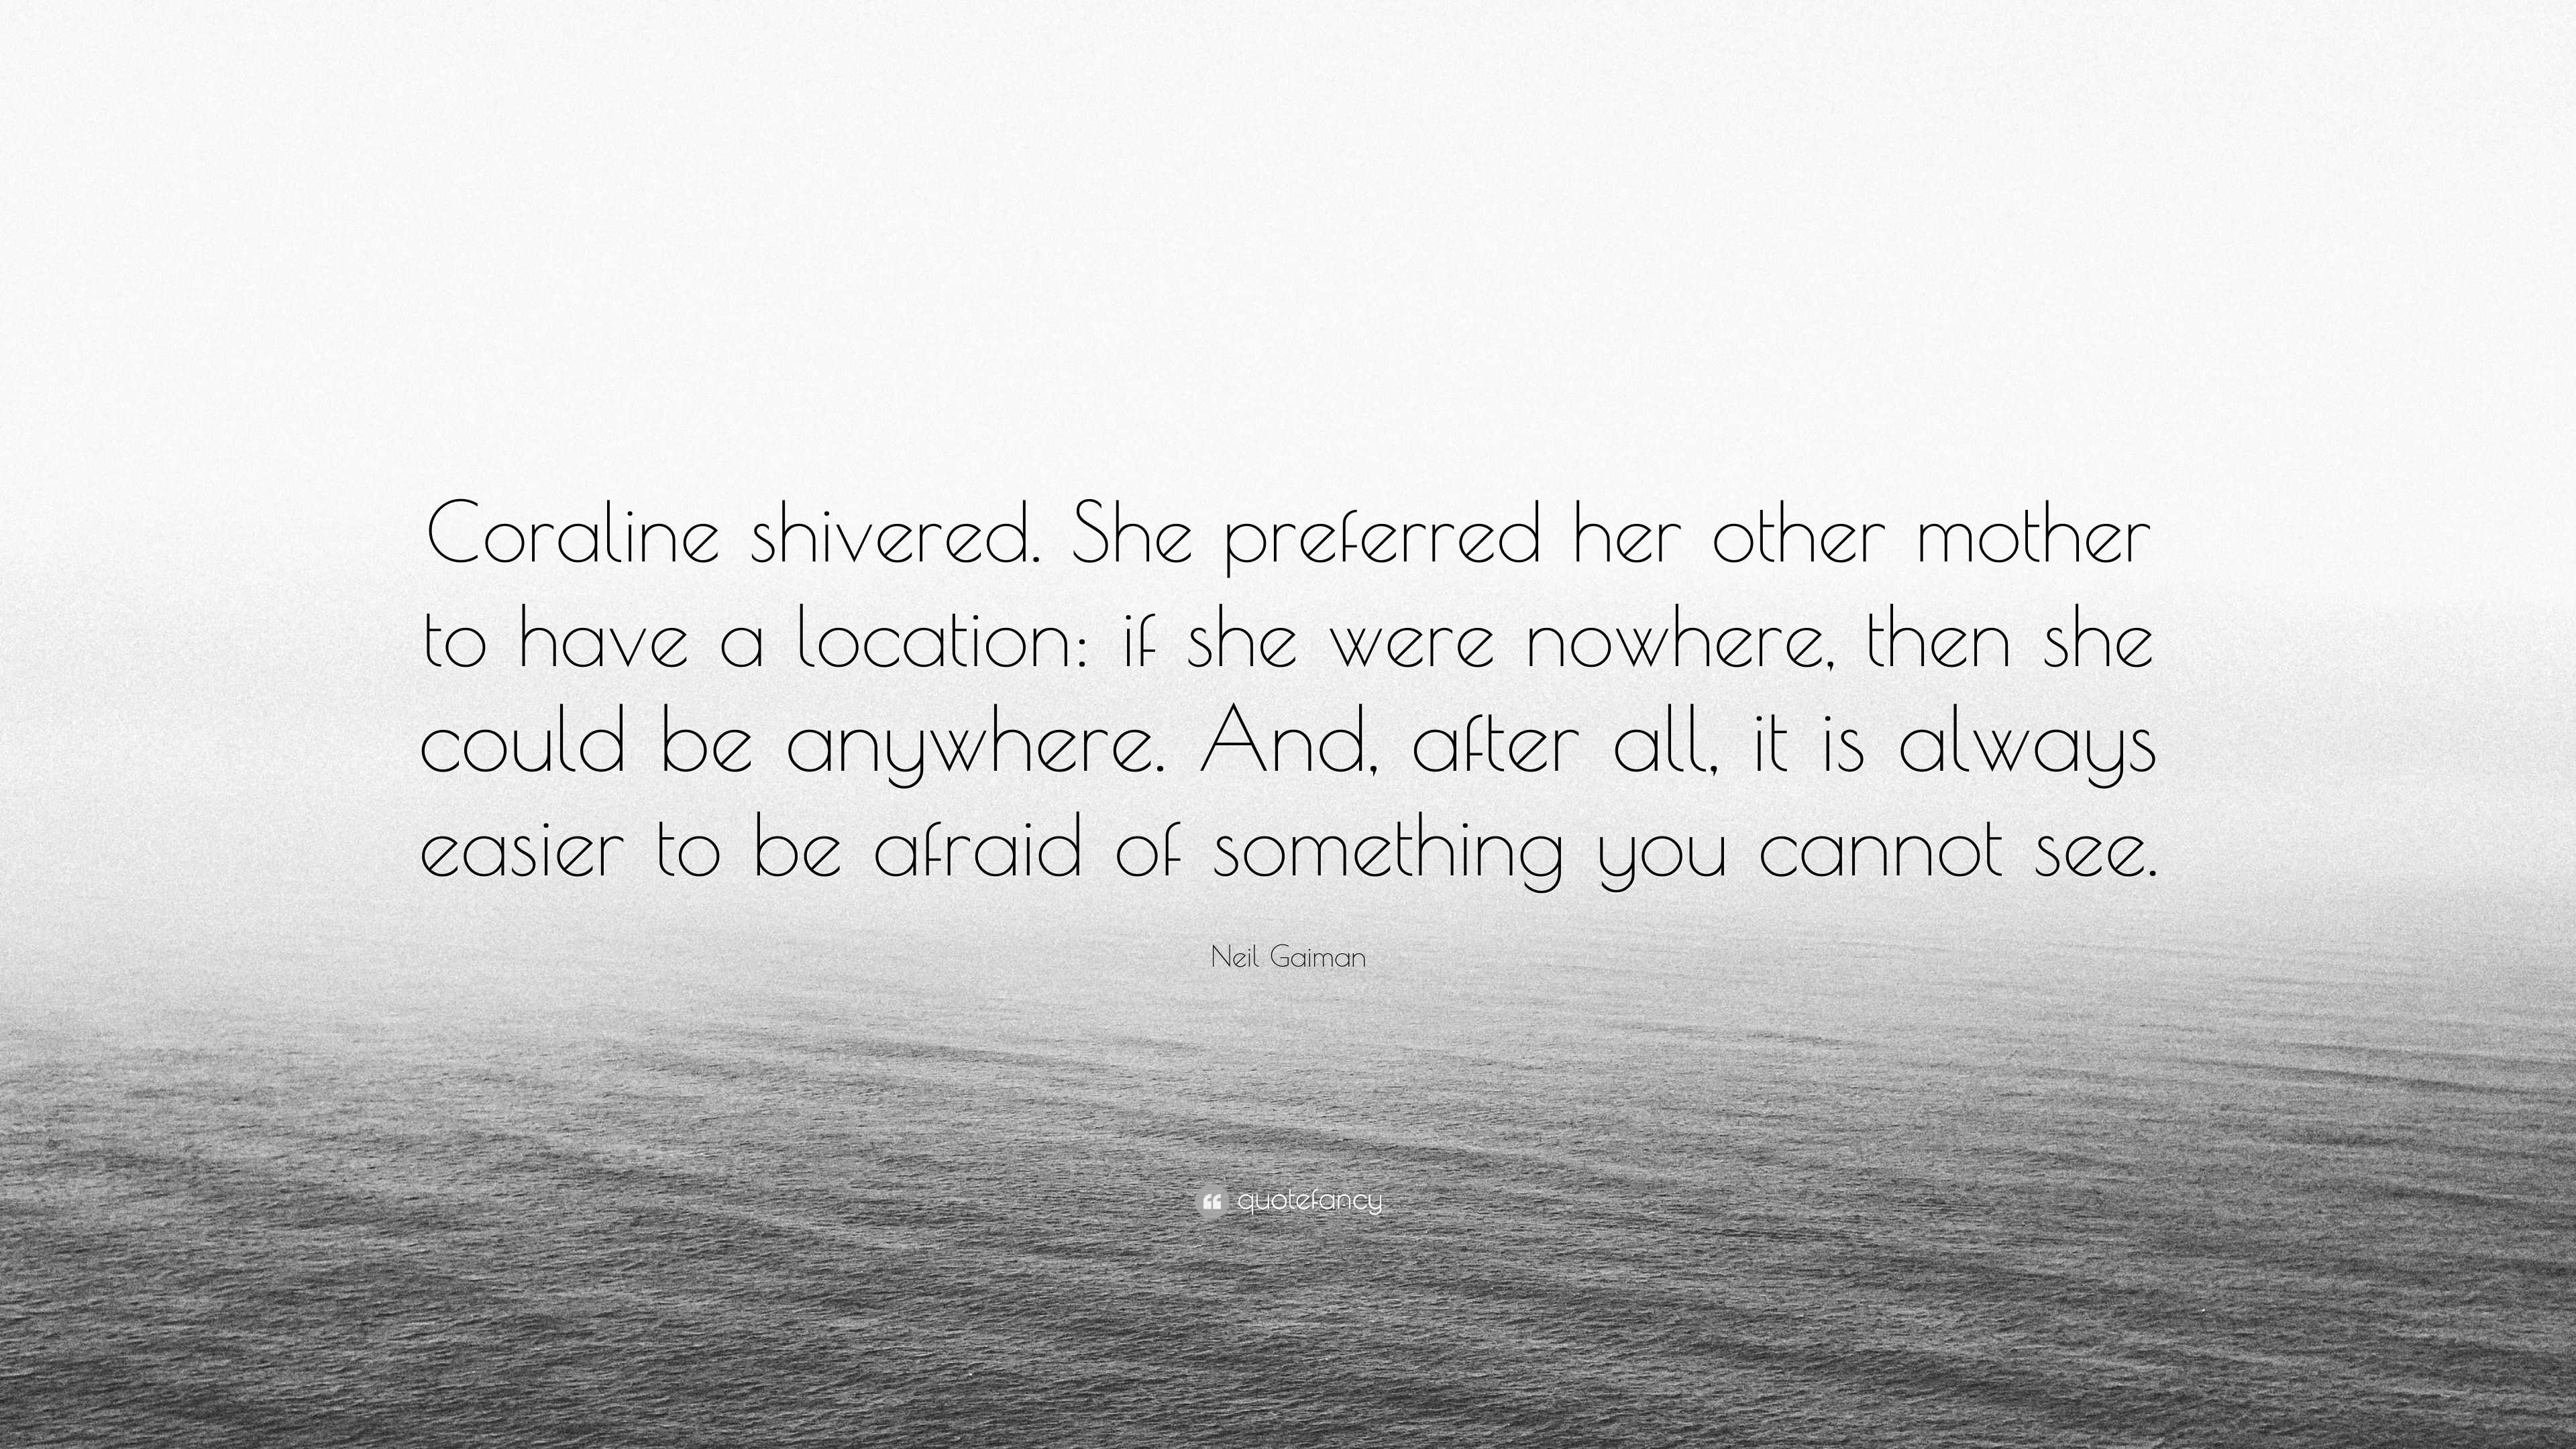 Neil Gaiman Quote: “Coraline shivered. She preferred her other mother ...